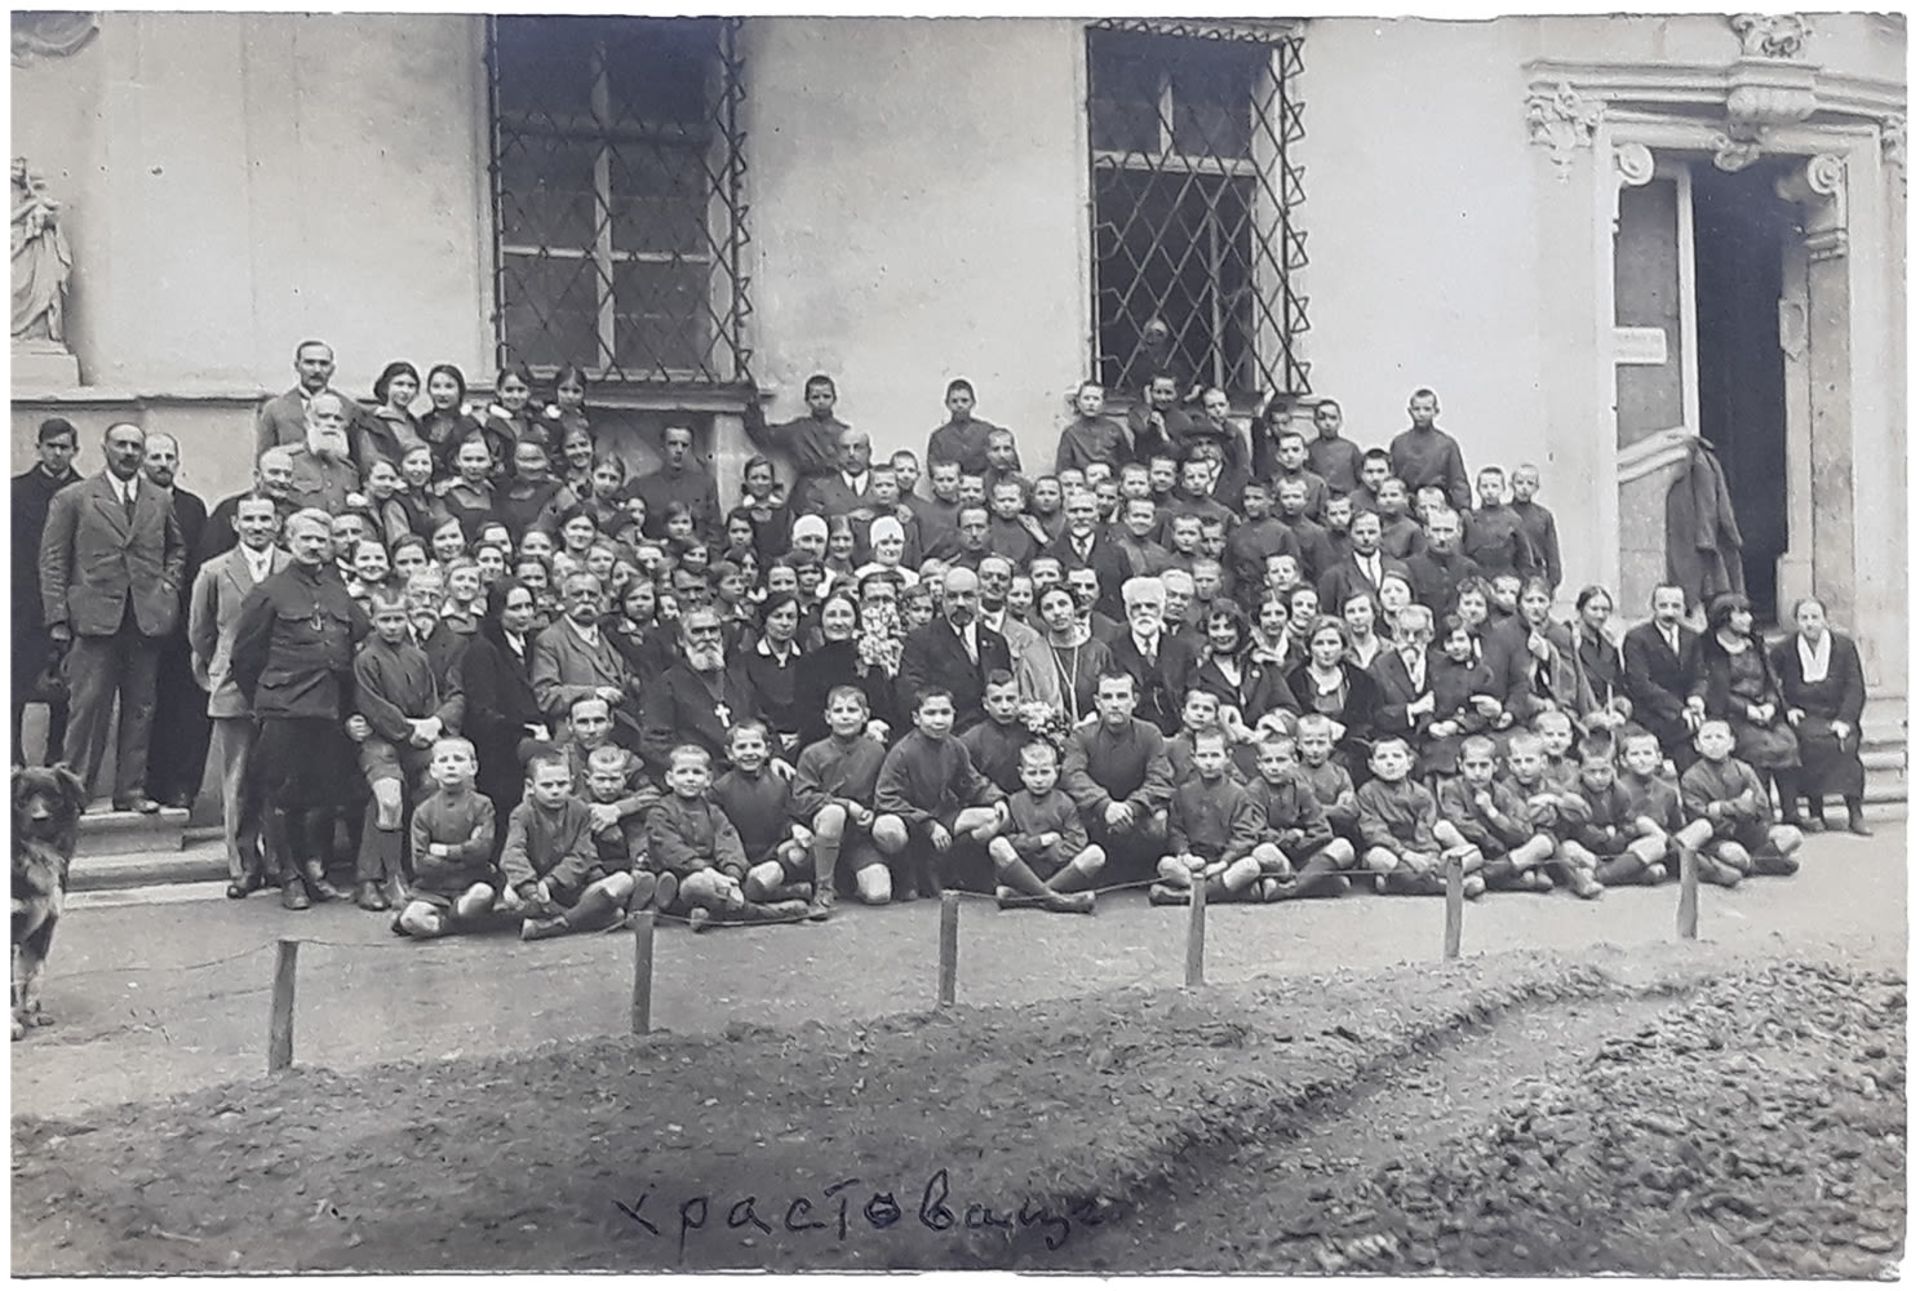 [Soviet]. General Kutepov in an orphanage in Ch?stovice. Photograph. 1920s.